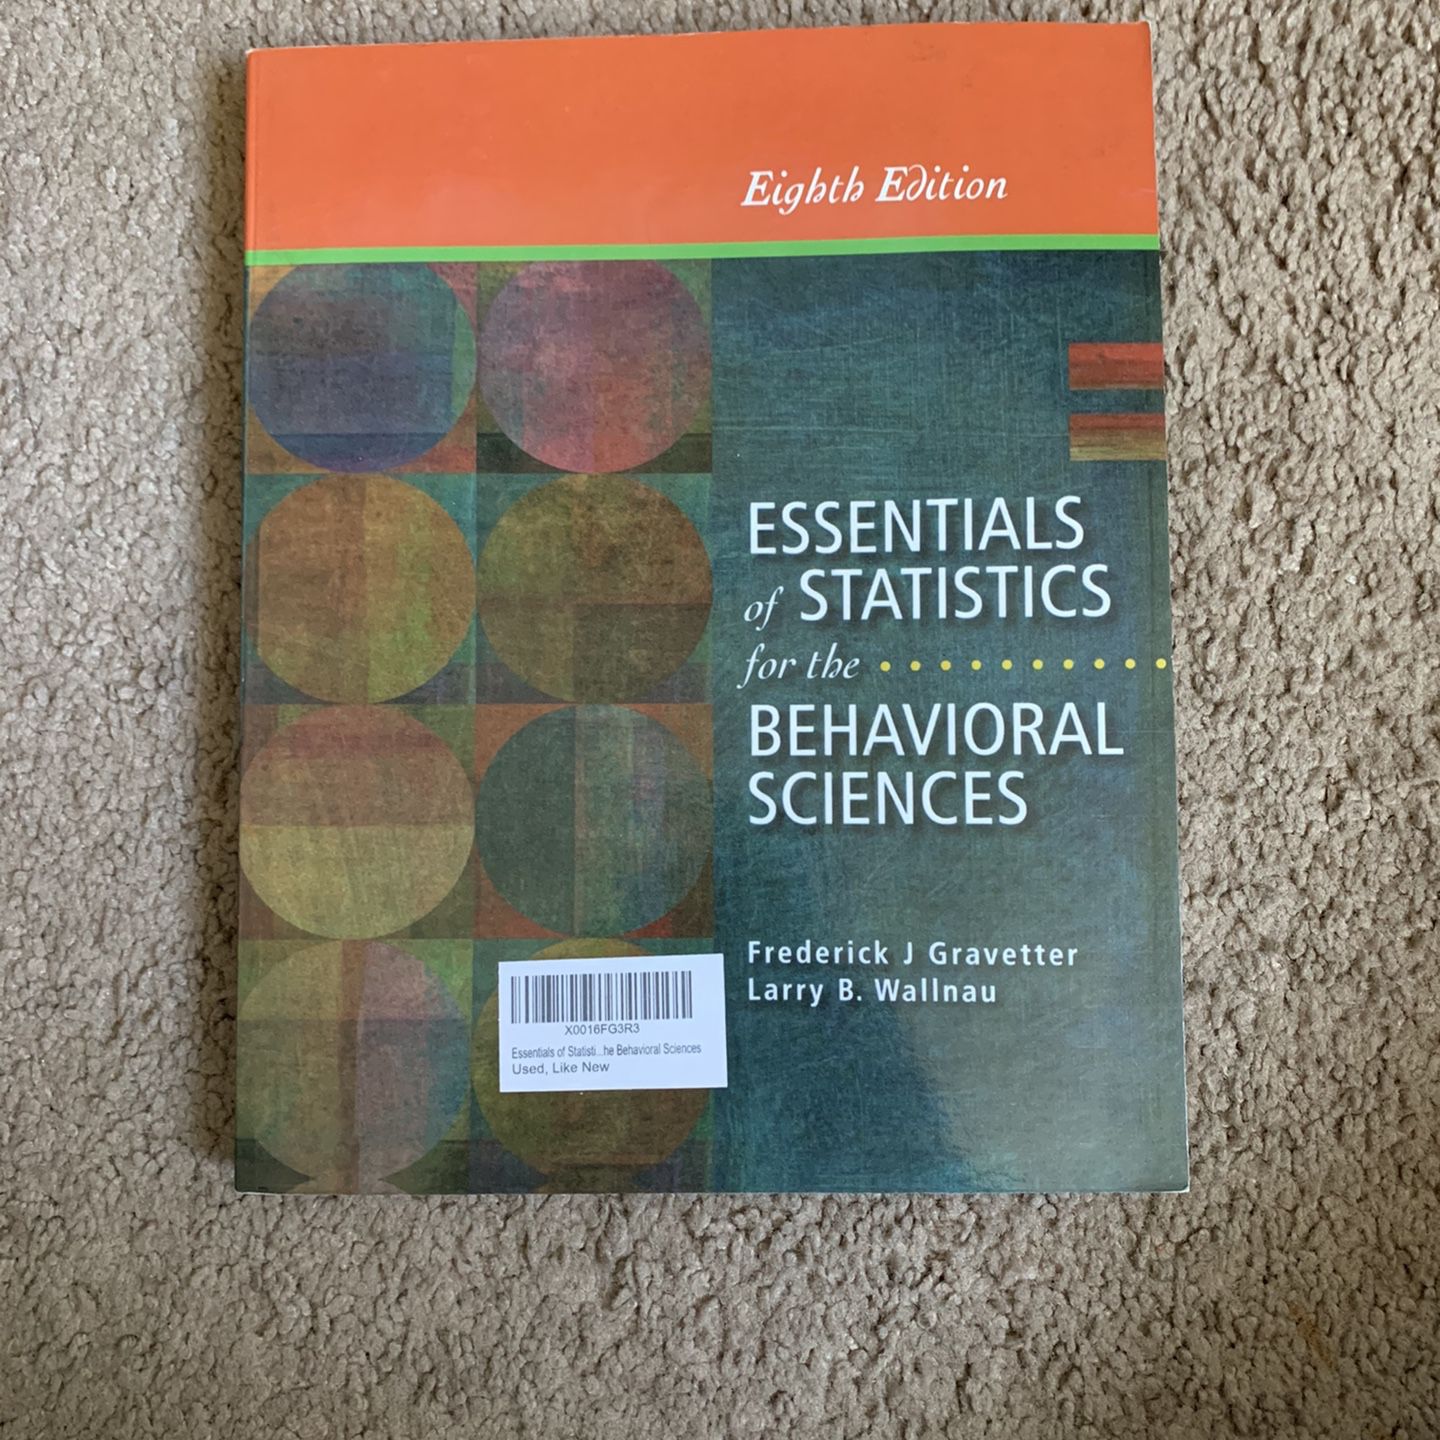 Essentials Of Statistics For The Behavioral Sciences Eight Edition - Used Like New